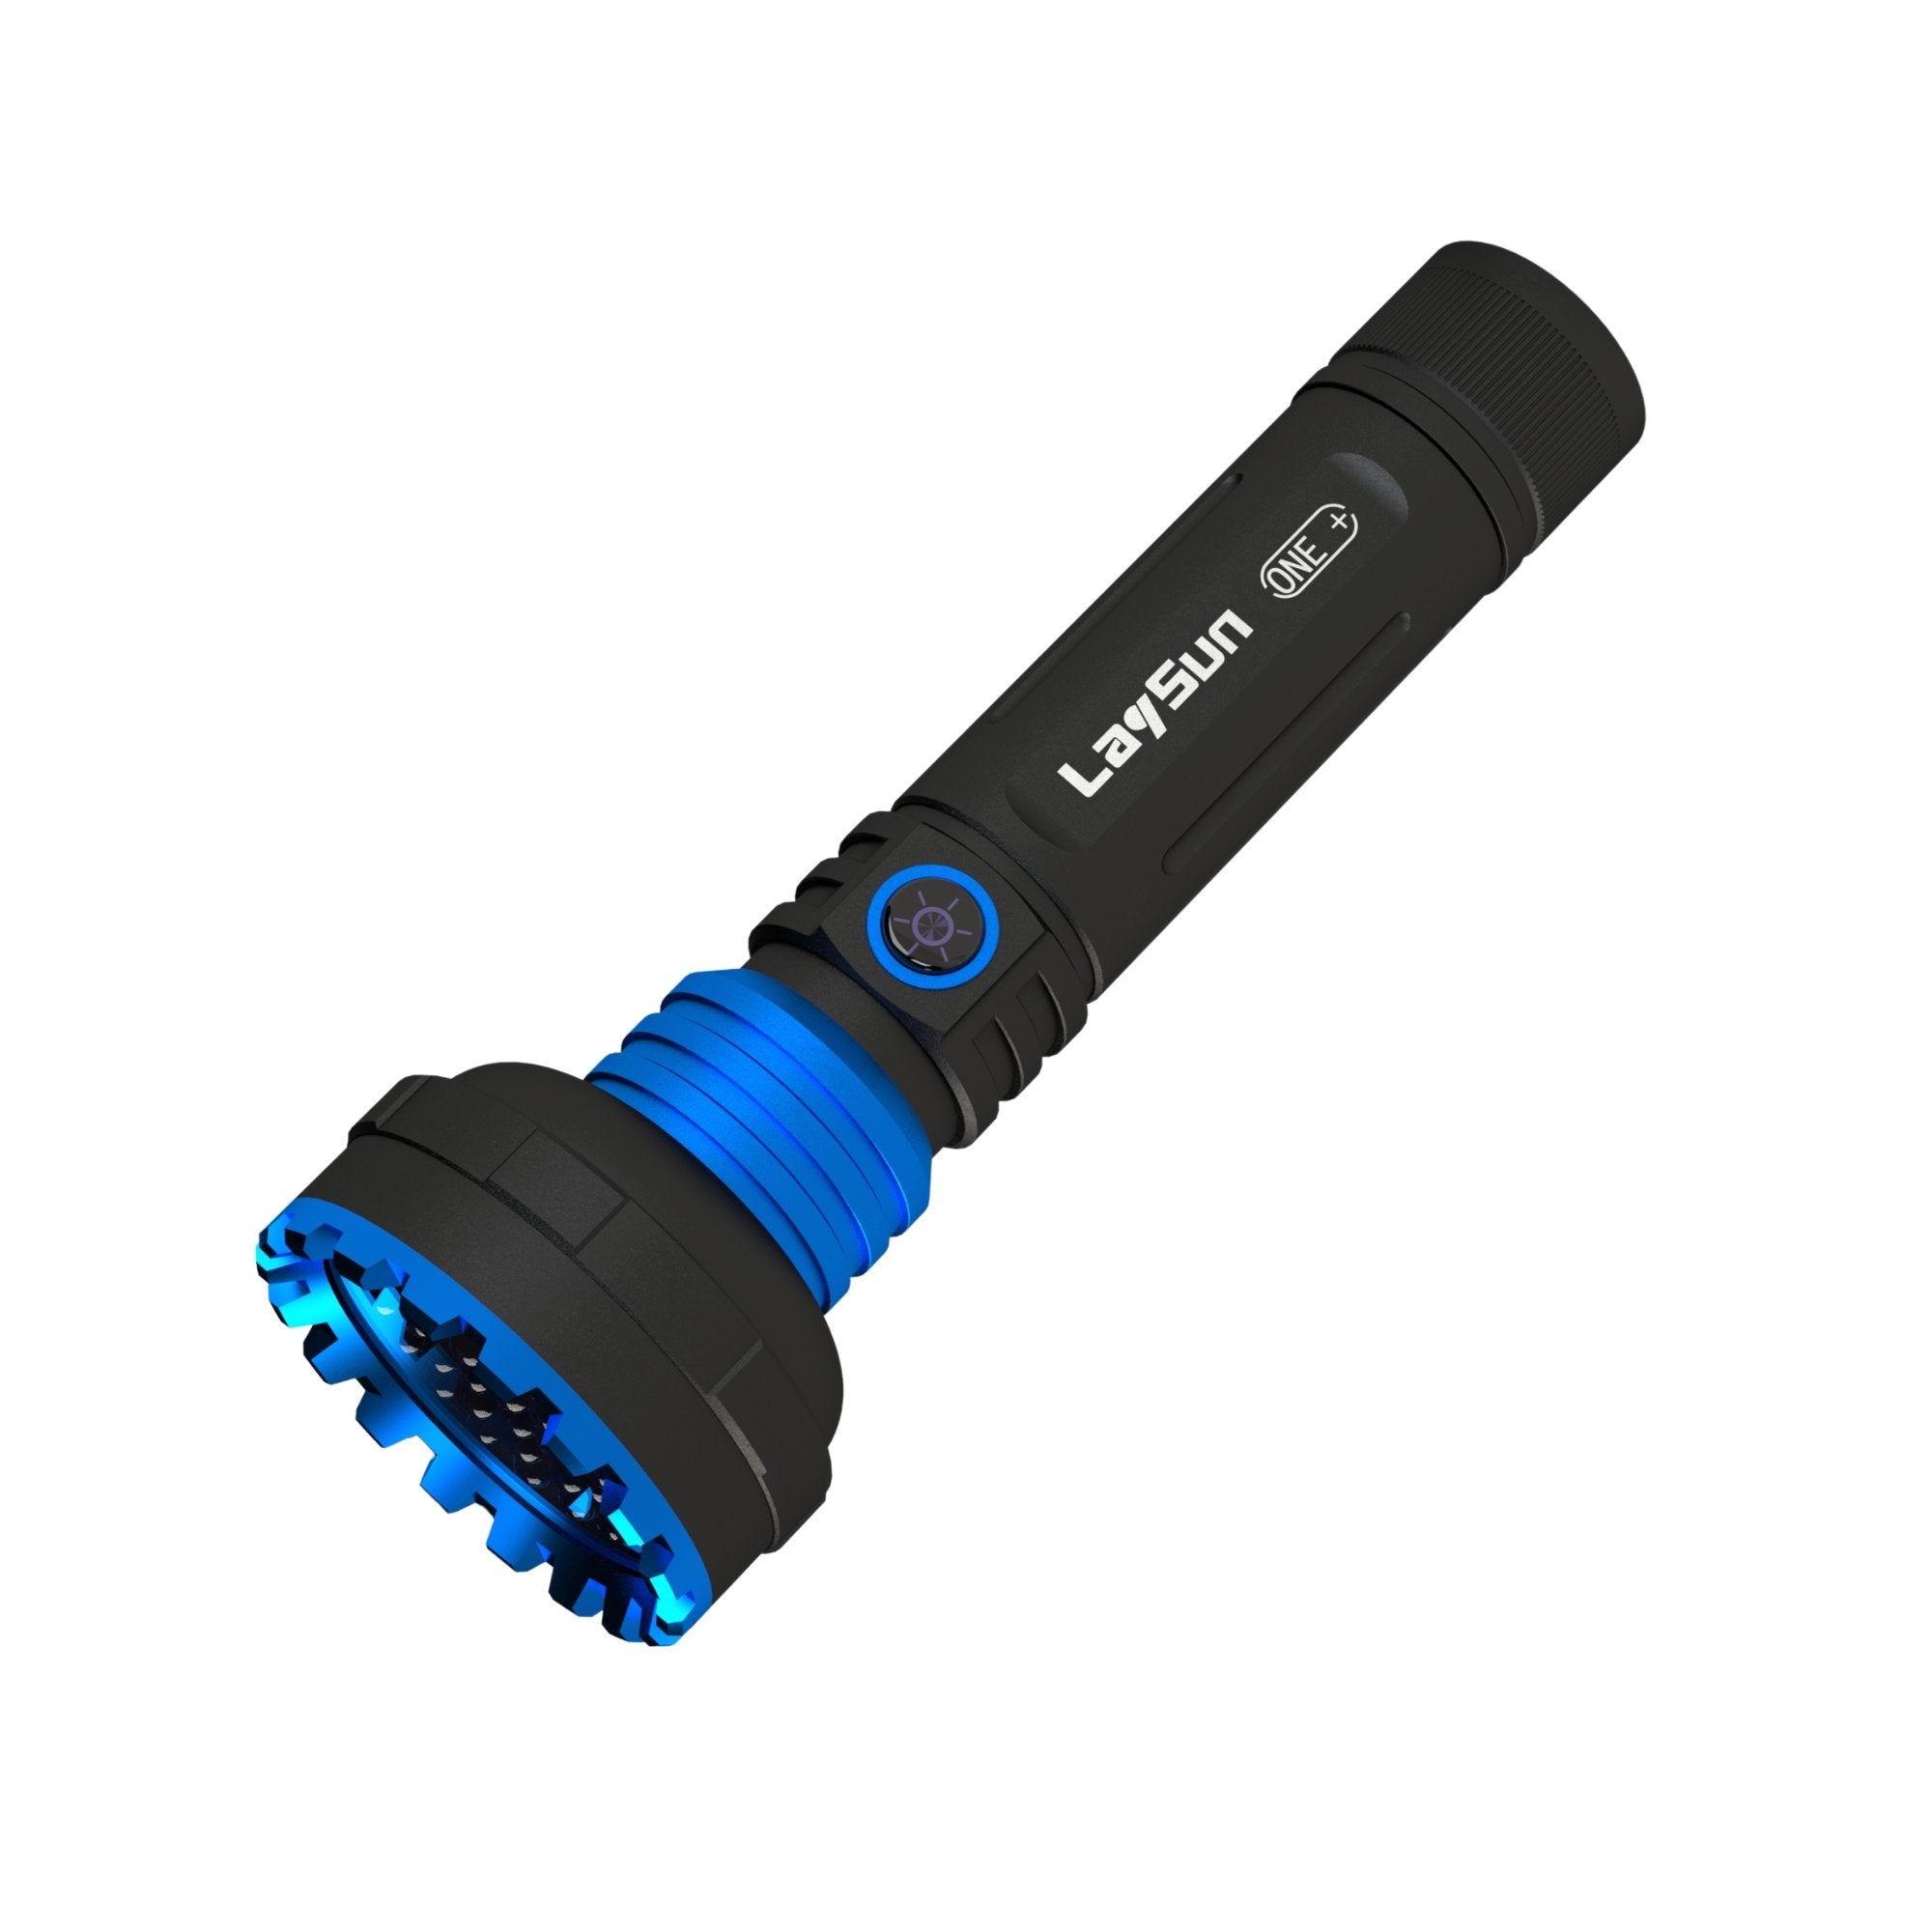 LaySun Quick Connect Rechargeable UV LED Flashlight - LaySun Smart